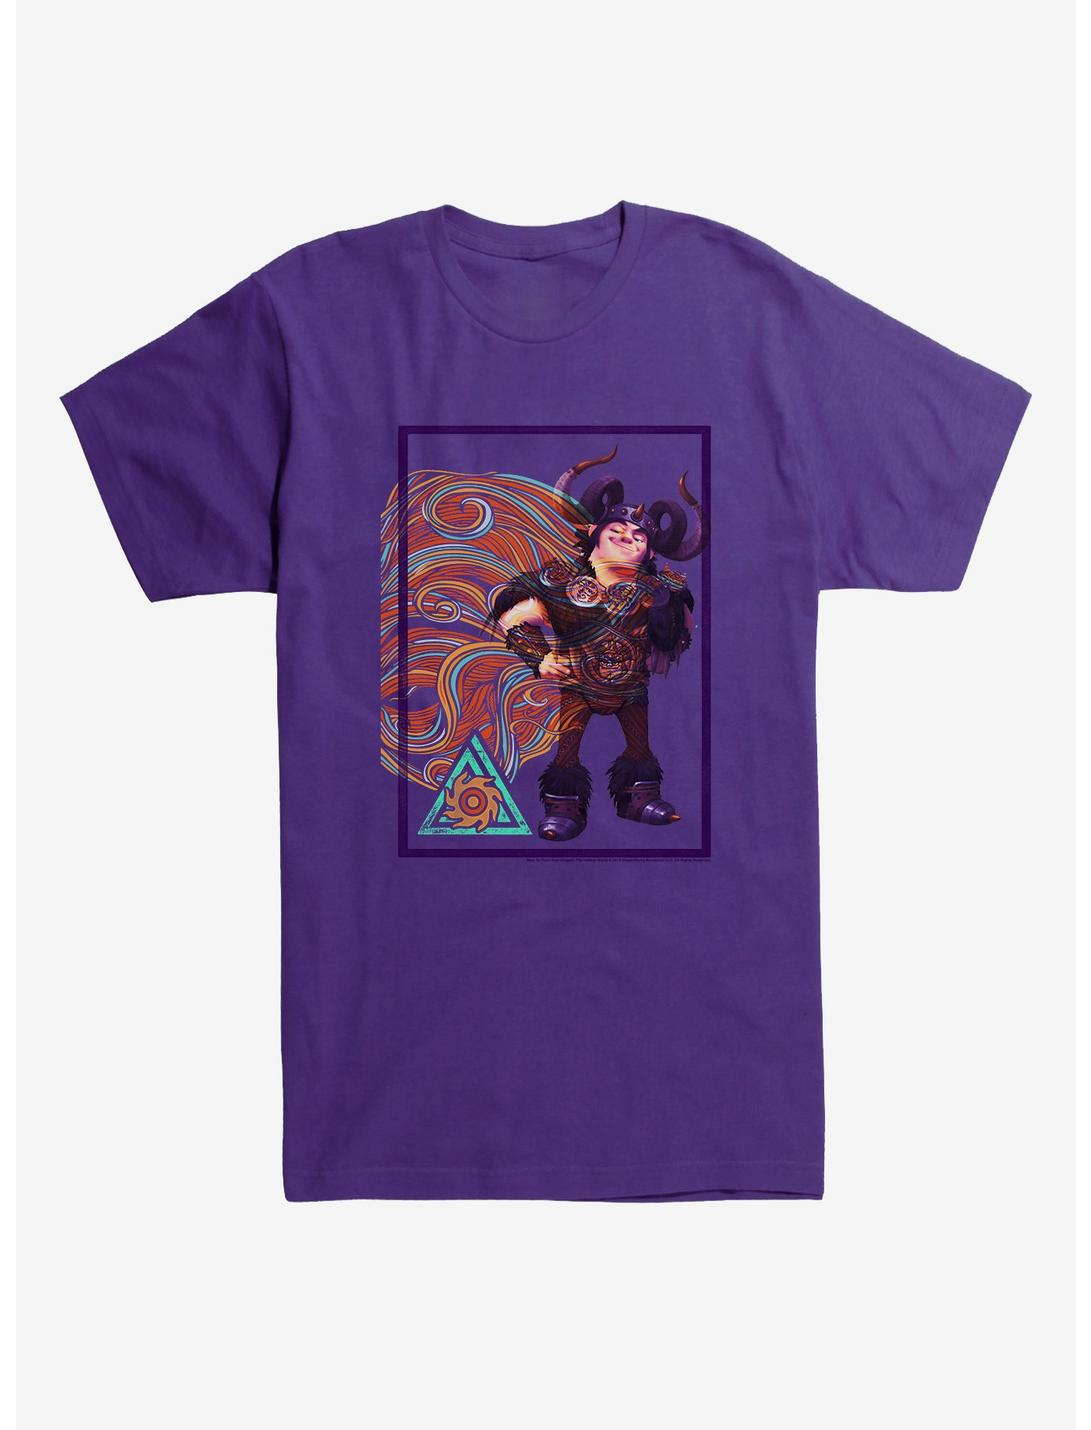 How To Train Your Dragon Snotlout Swirl T-Shirt, PURPLE RUSH, hi-res